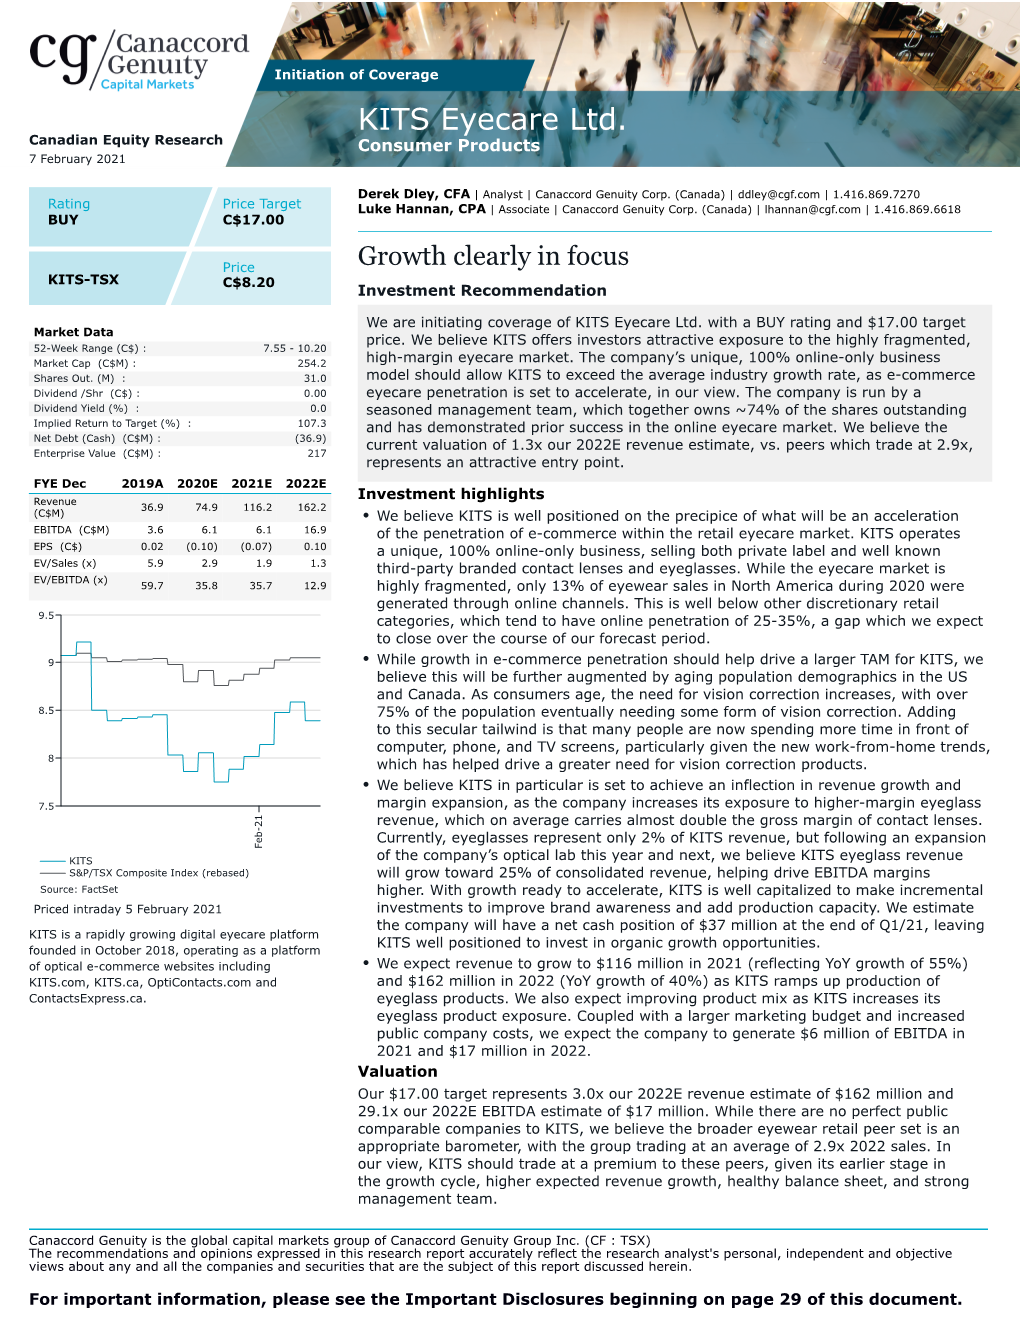 KITS Eyecare Ltd. Canadian Equity Research Consumer Products 7 February 2021